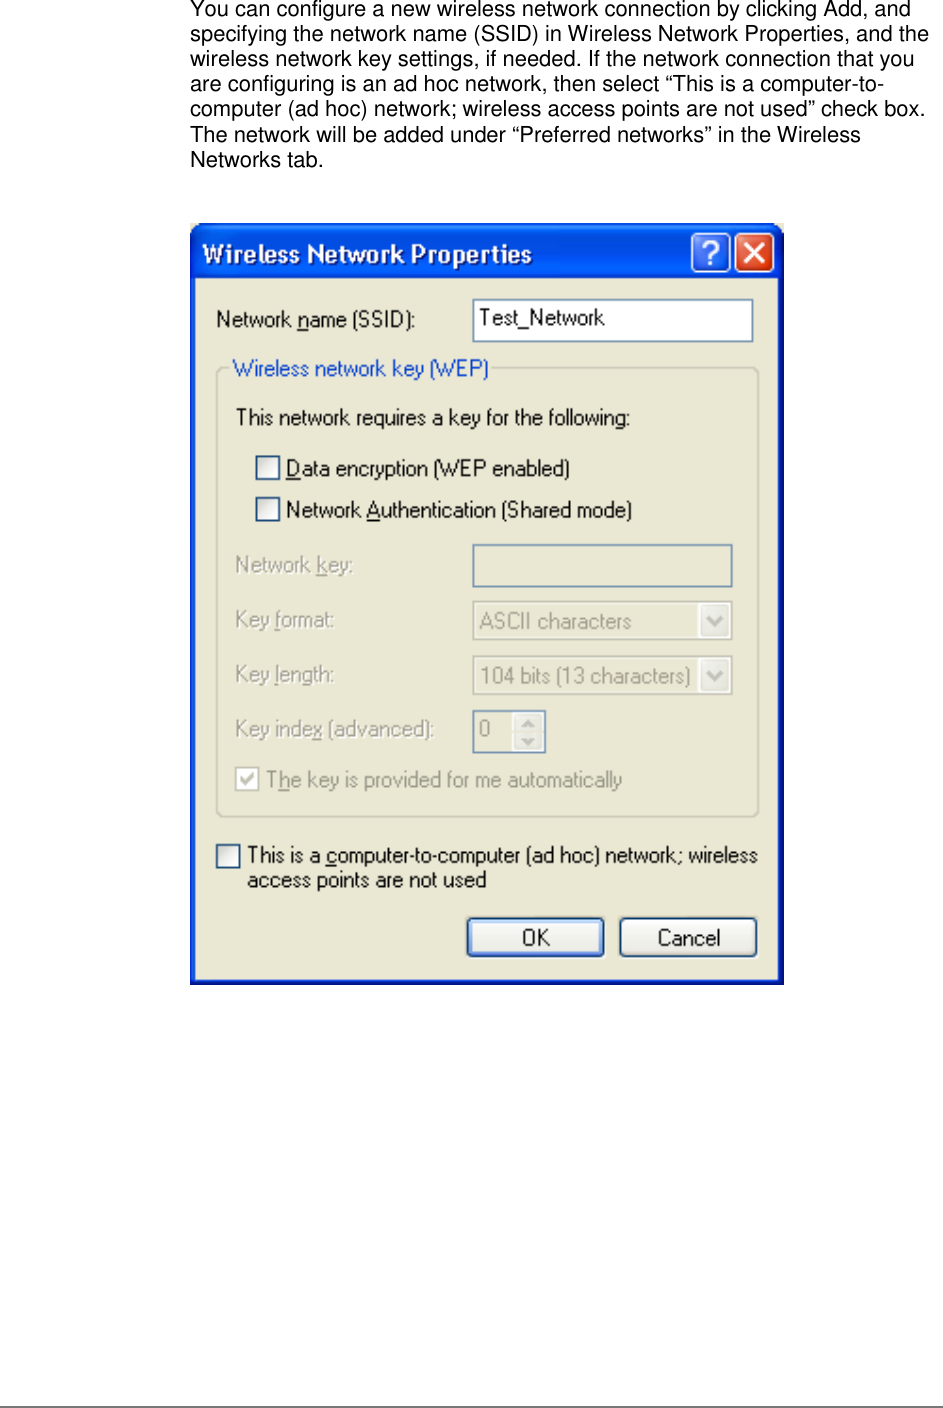 You can configure a new wireless network connection by clicking Add, andspecifying the network name (SSID) in Wireless Network Properties, and thewireless network key settings, if needed. If the network connection that youare configuring is an ad hoc network, then select “This is a computer-to-computer (ad hoc) network; wireless access points are not used” check box.The network will be added under “Preferred networks” in the WirelessNetworks tab.